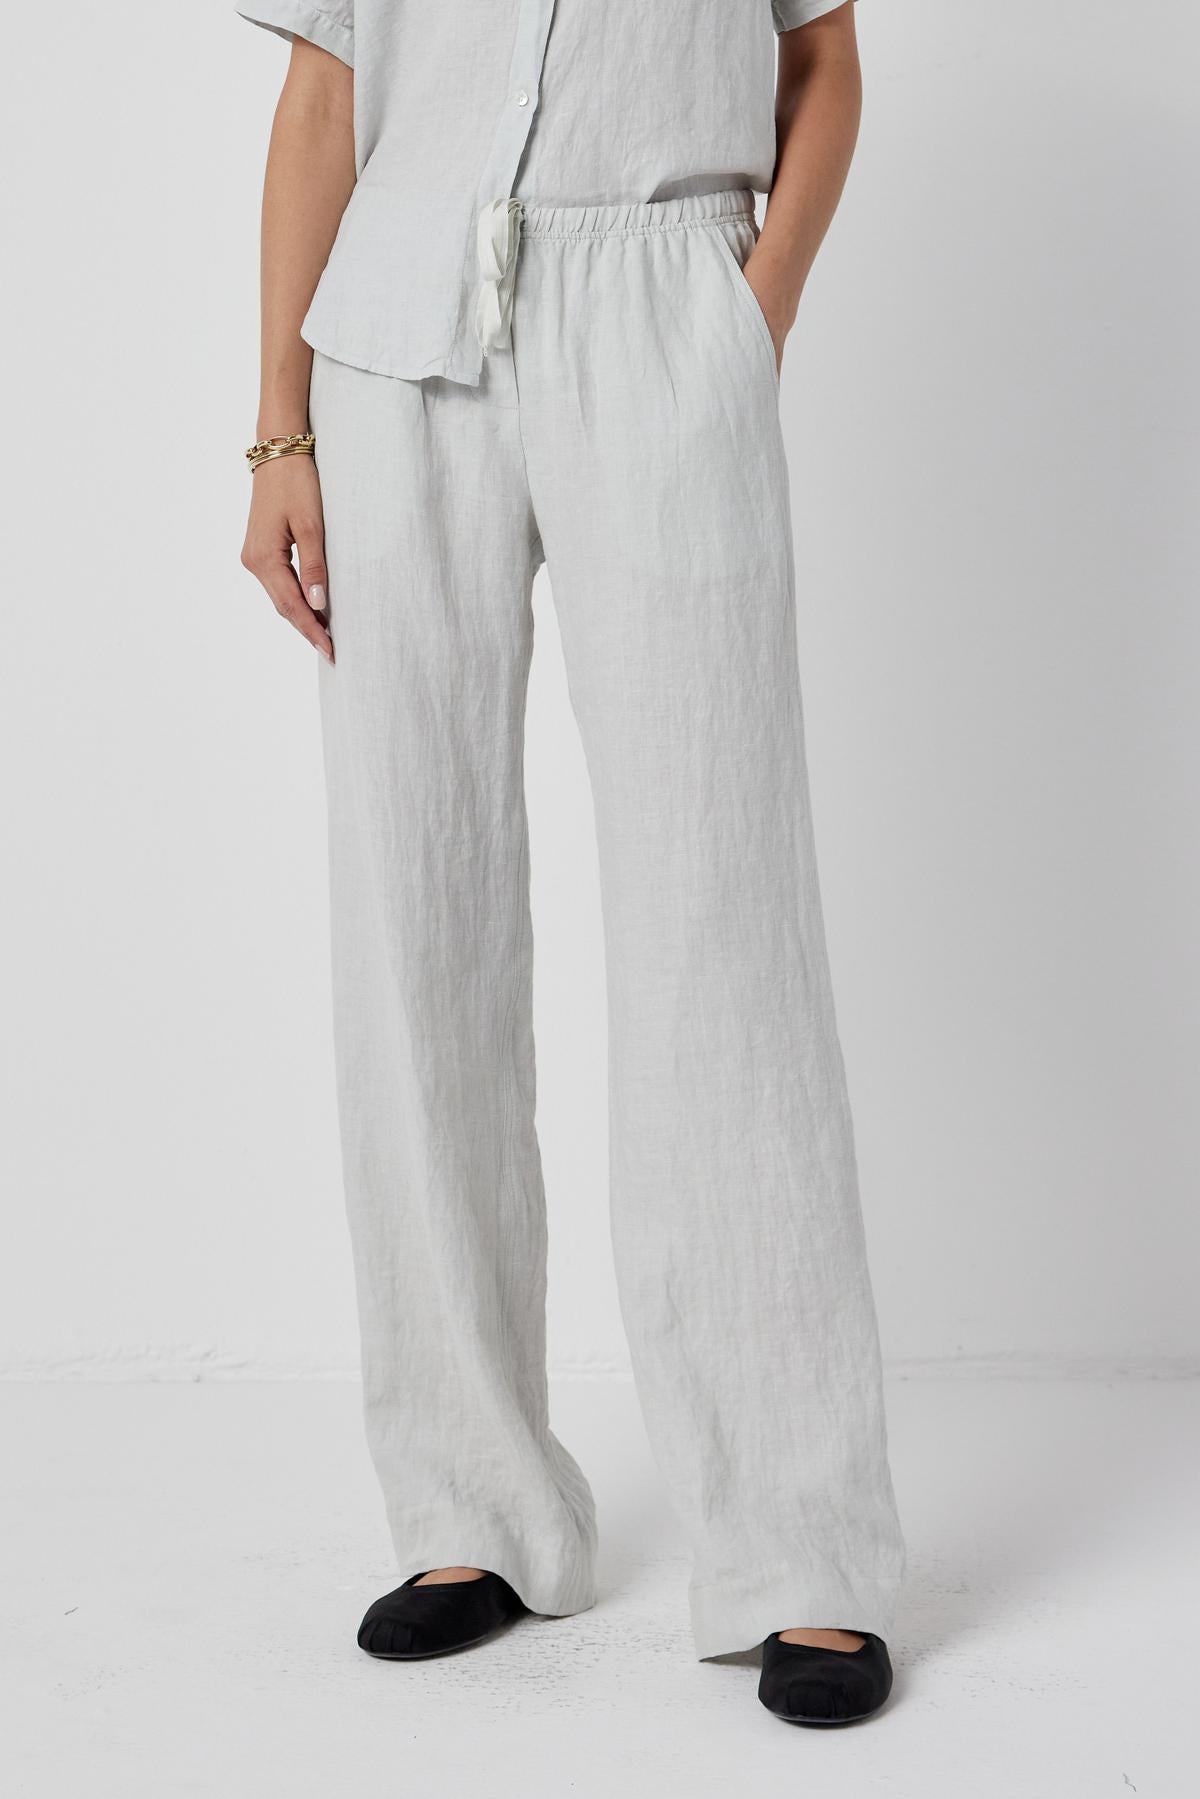   The model is wearing Velvet by Jenny Graham's PICO PANT, a relaxed fit linen pants with an elastic waistband, and a white shirt. 